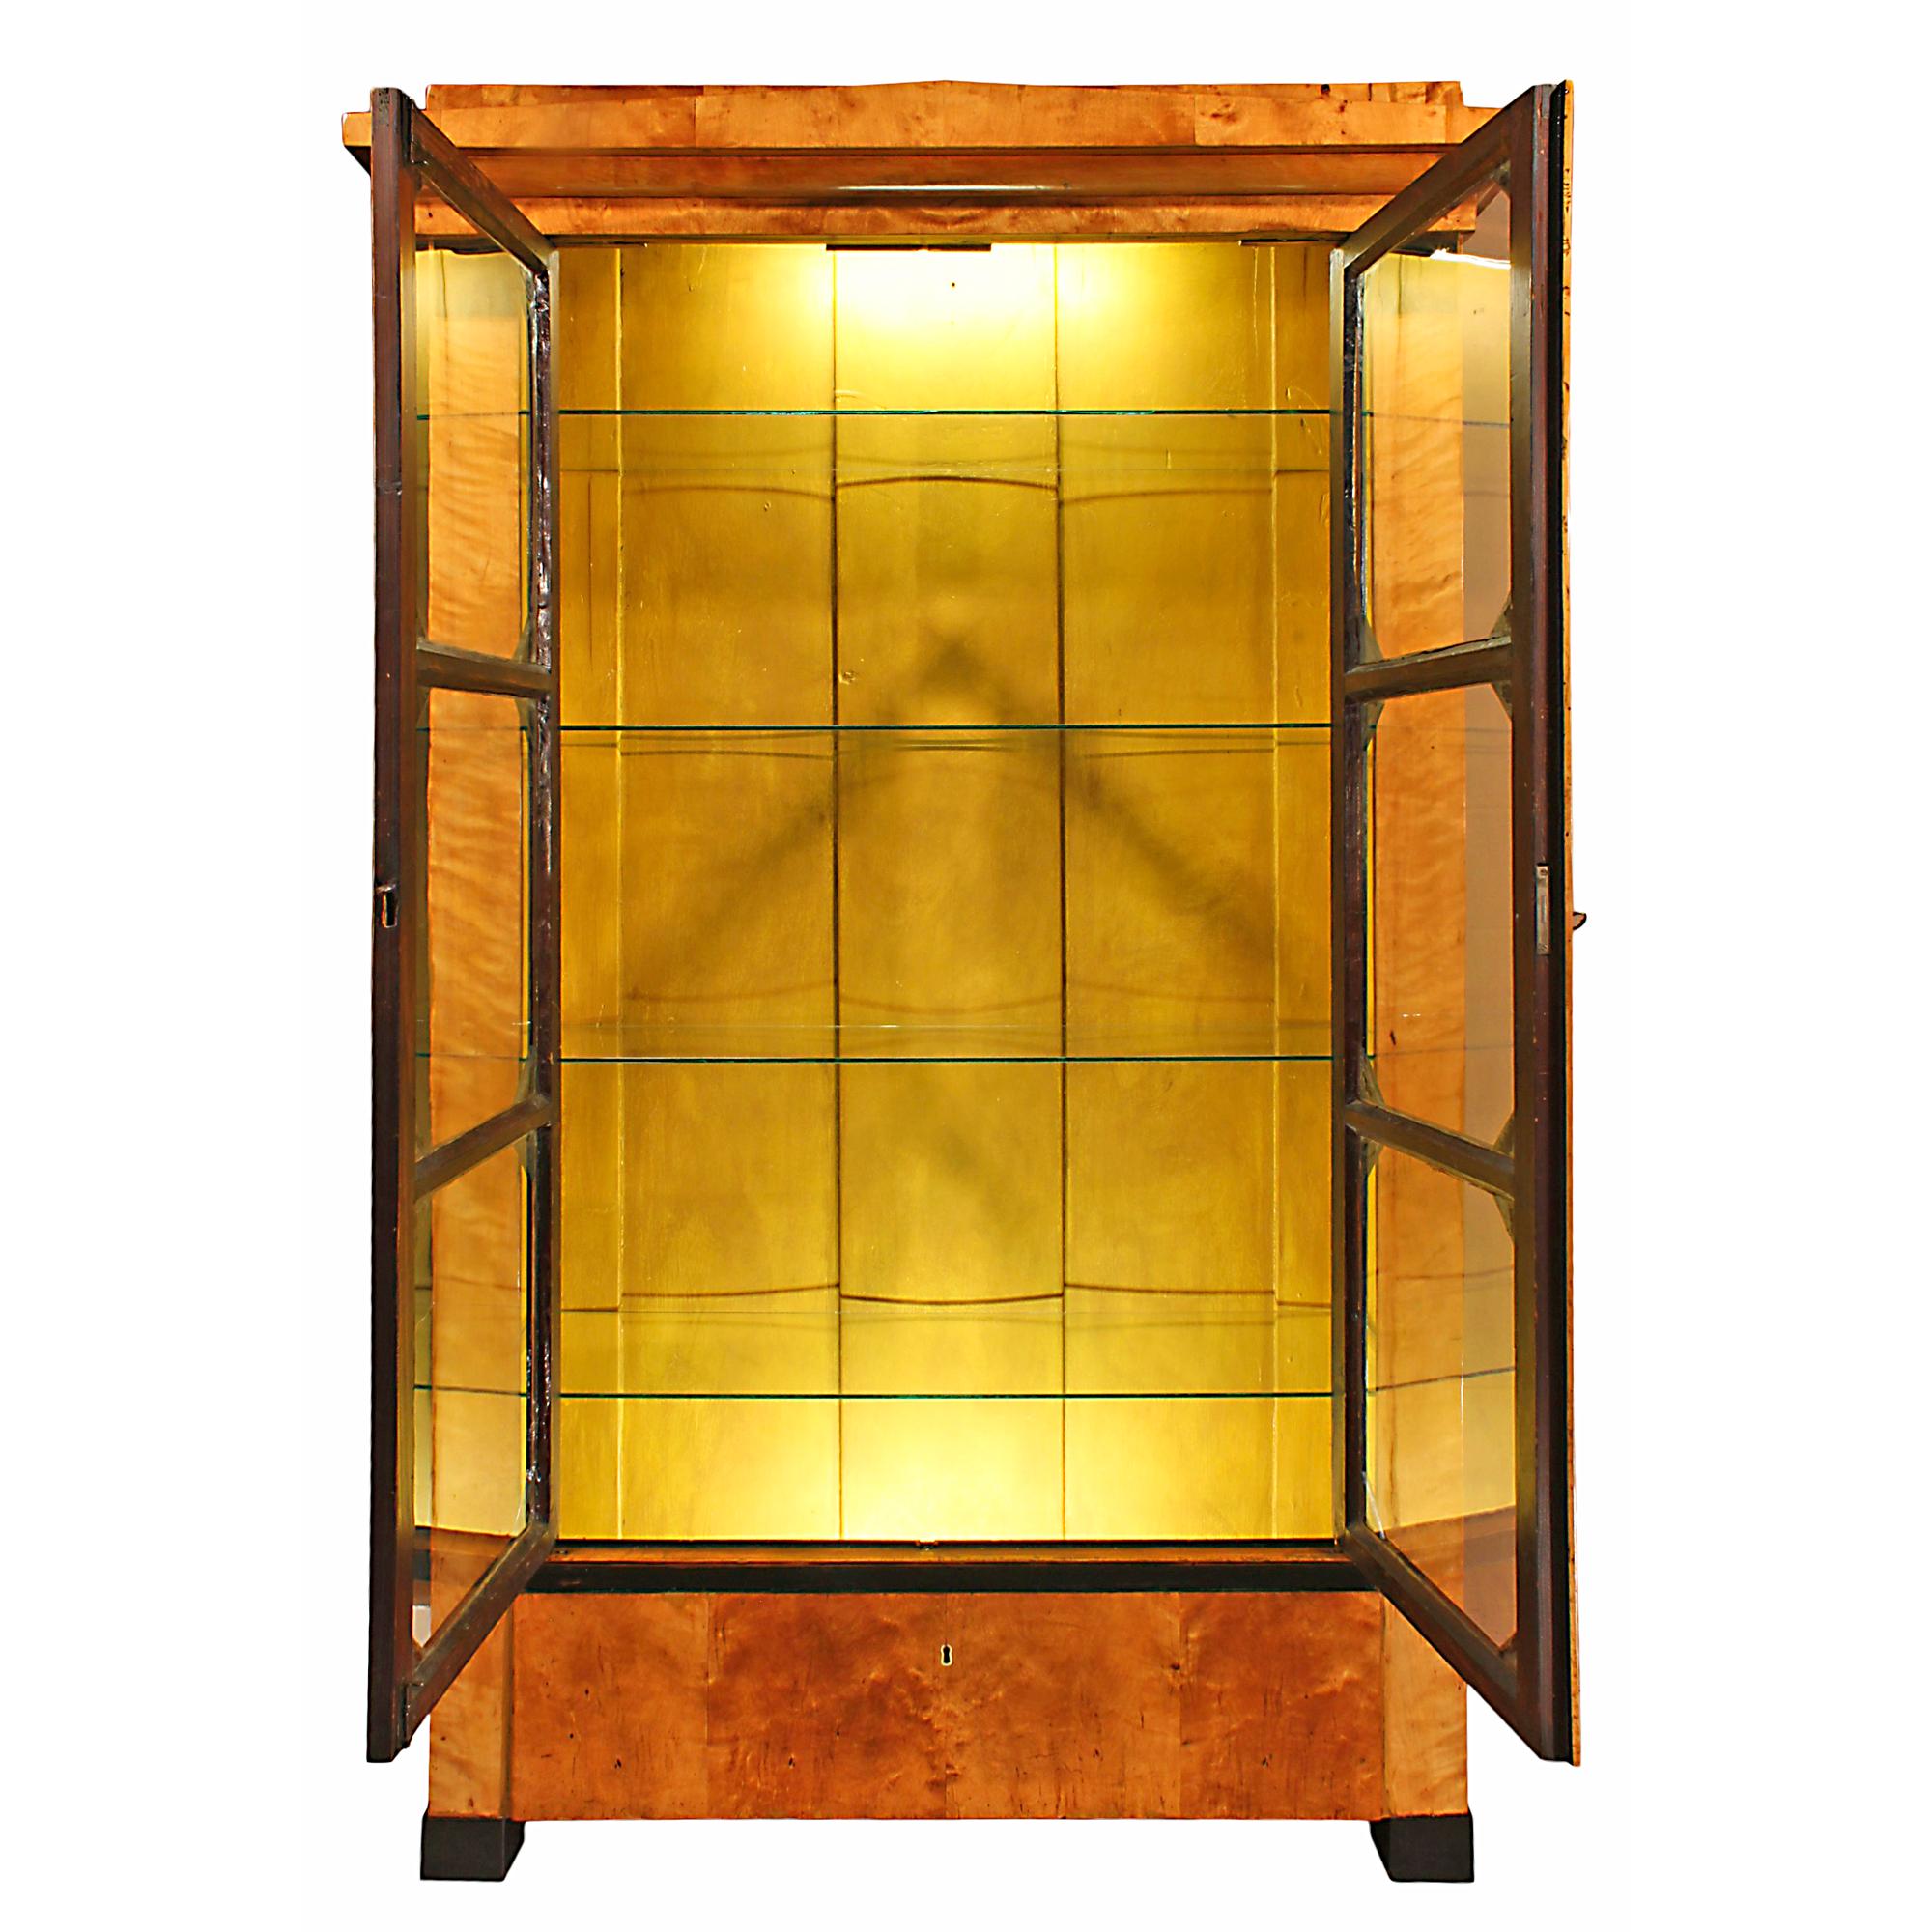 A stunning early 19th century cherry and ebony Biedermeier vitrine, circa 1850. The vitrine is raised on square ebonized feet below a faux drawer with ebony trim. Above is a pair of hand blown glass doors open to four glass shelves. The doors, with